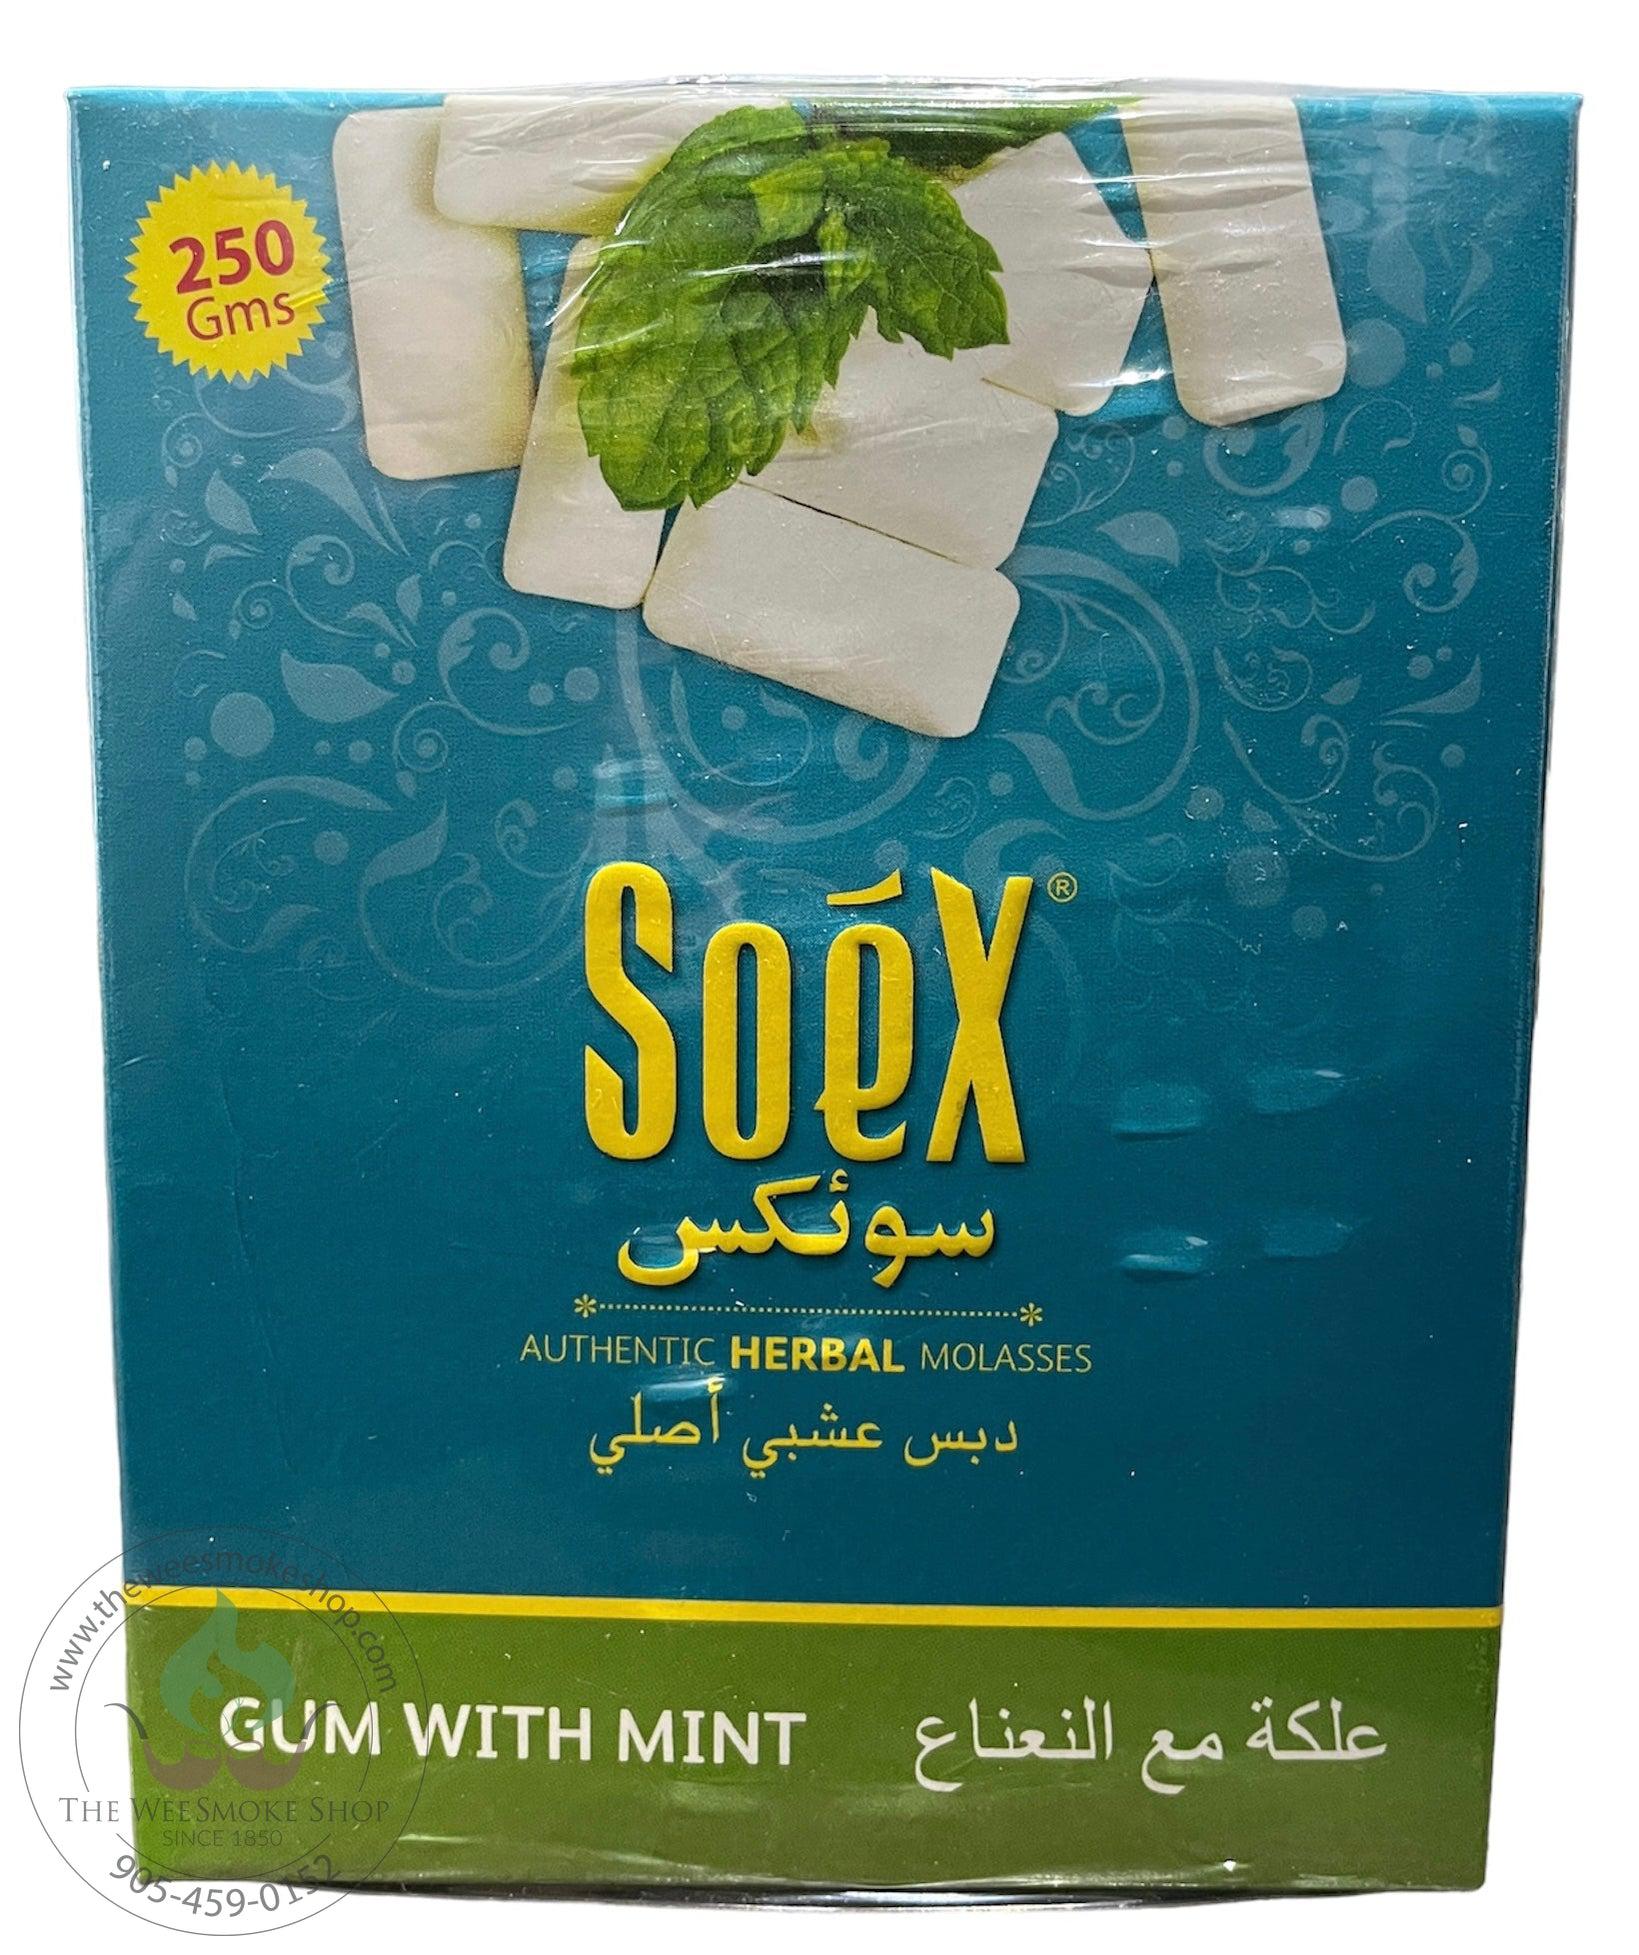 Gum with Mint Soex Herbal Molasses (250g)-Hookah accessories-The Wee Smoke Shop